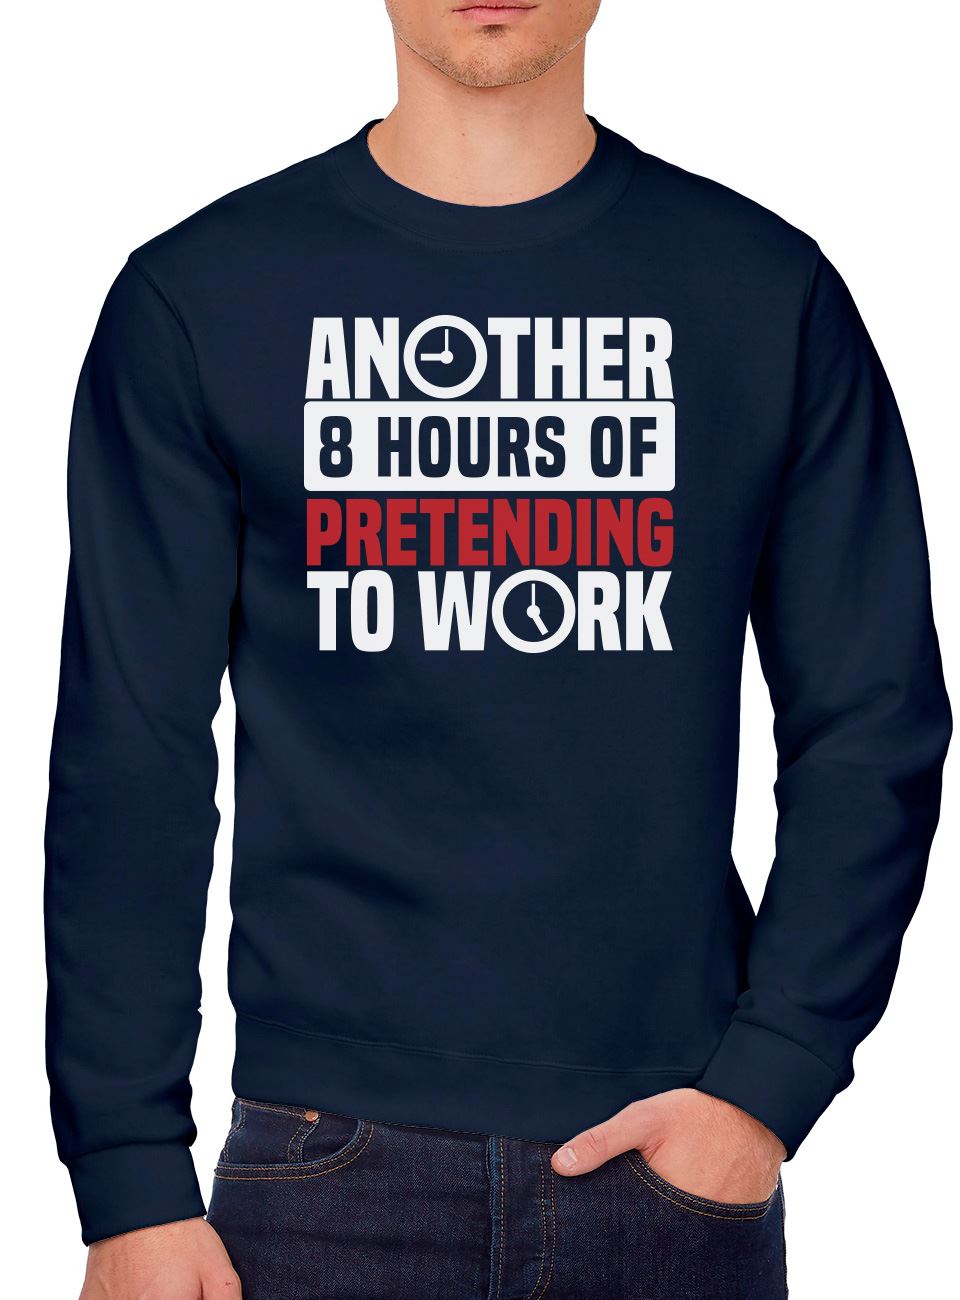 Another 8 Hours of Pretending to Work - Youth & Mens Sweatshirt